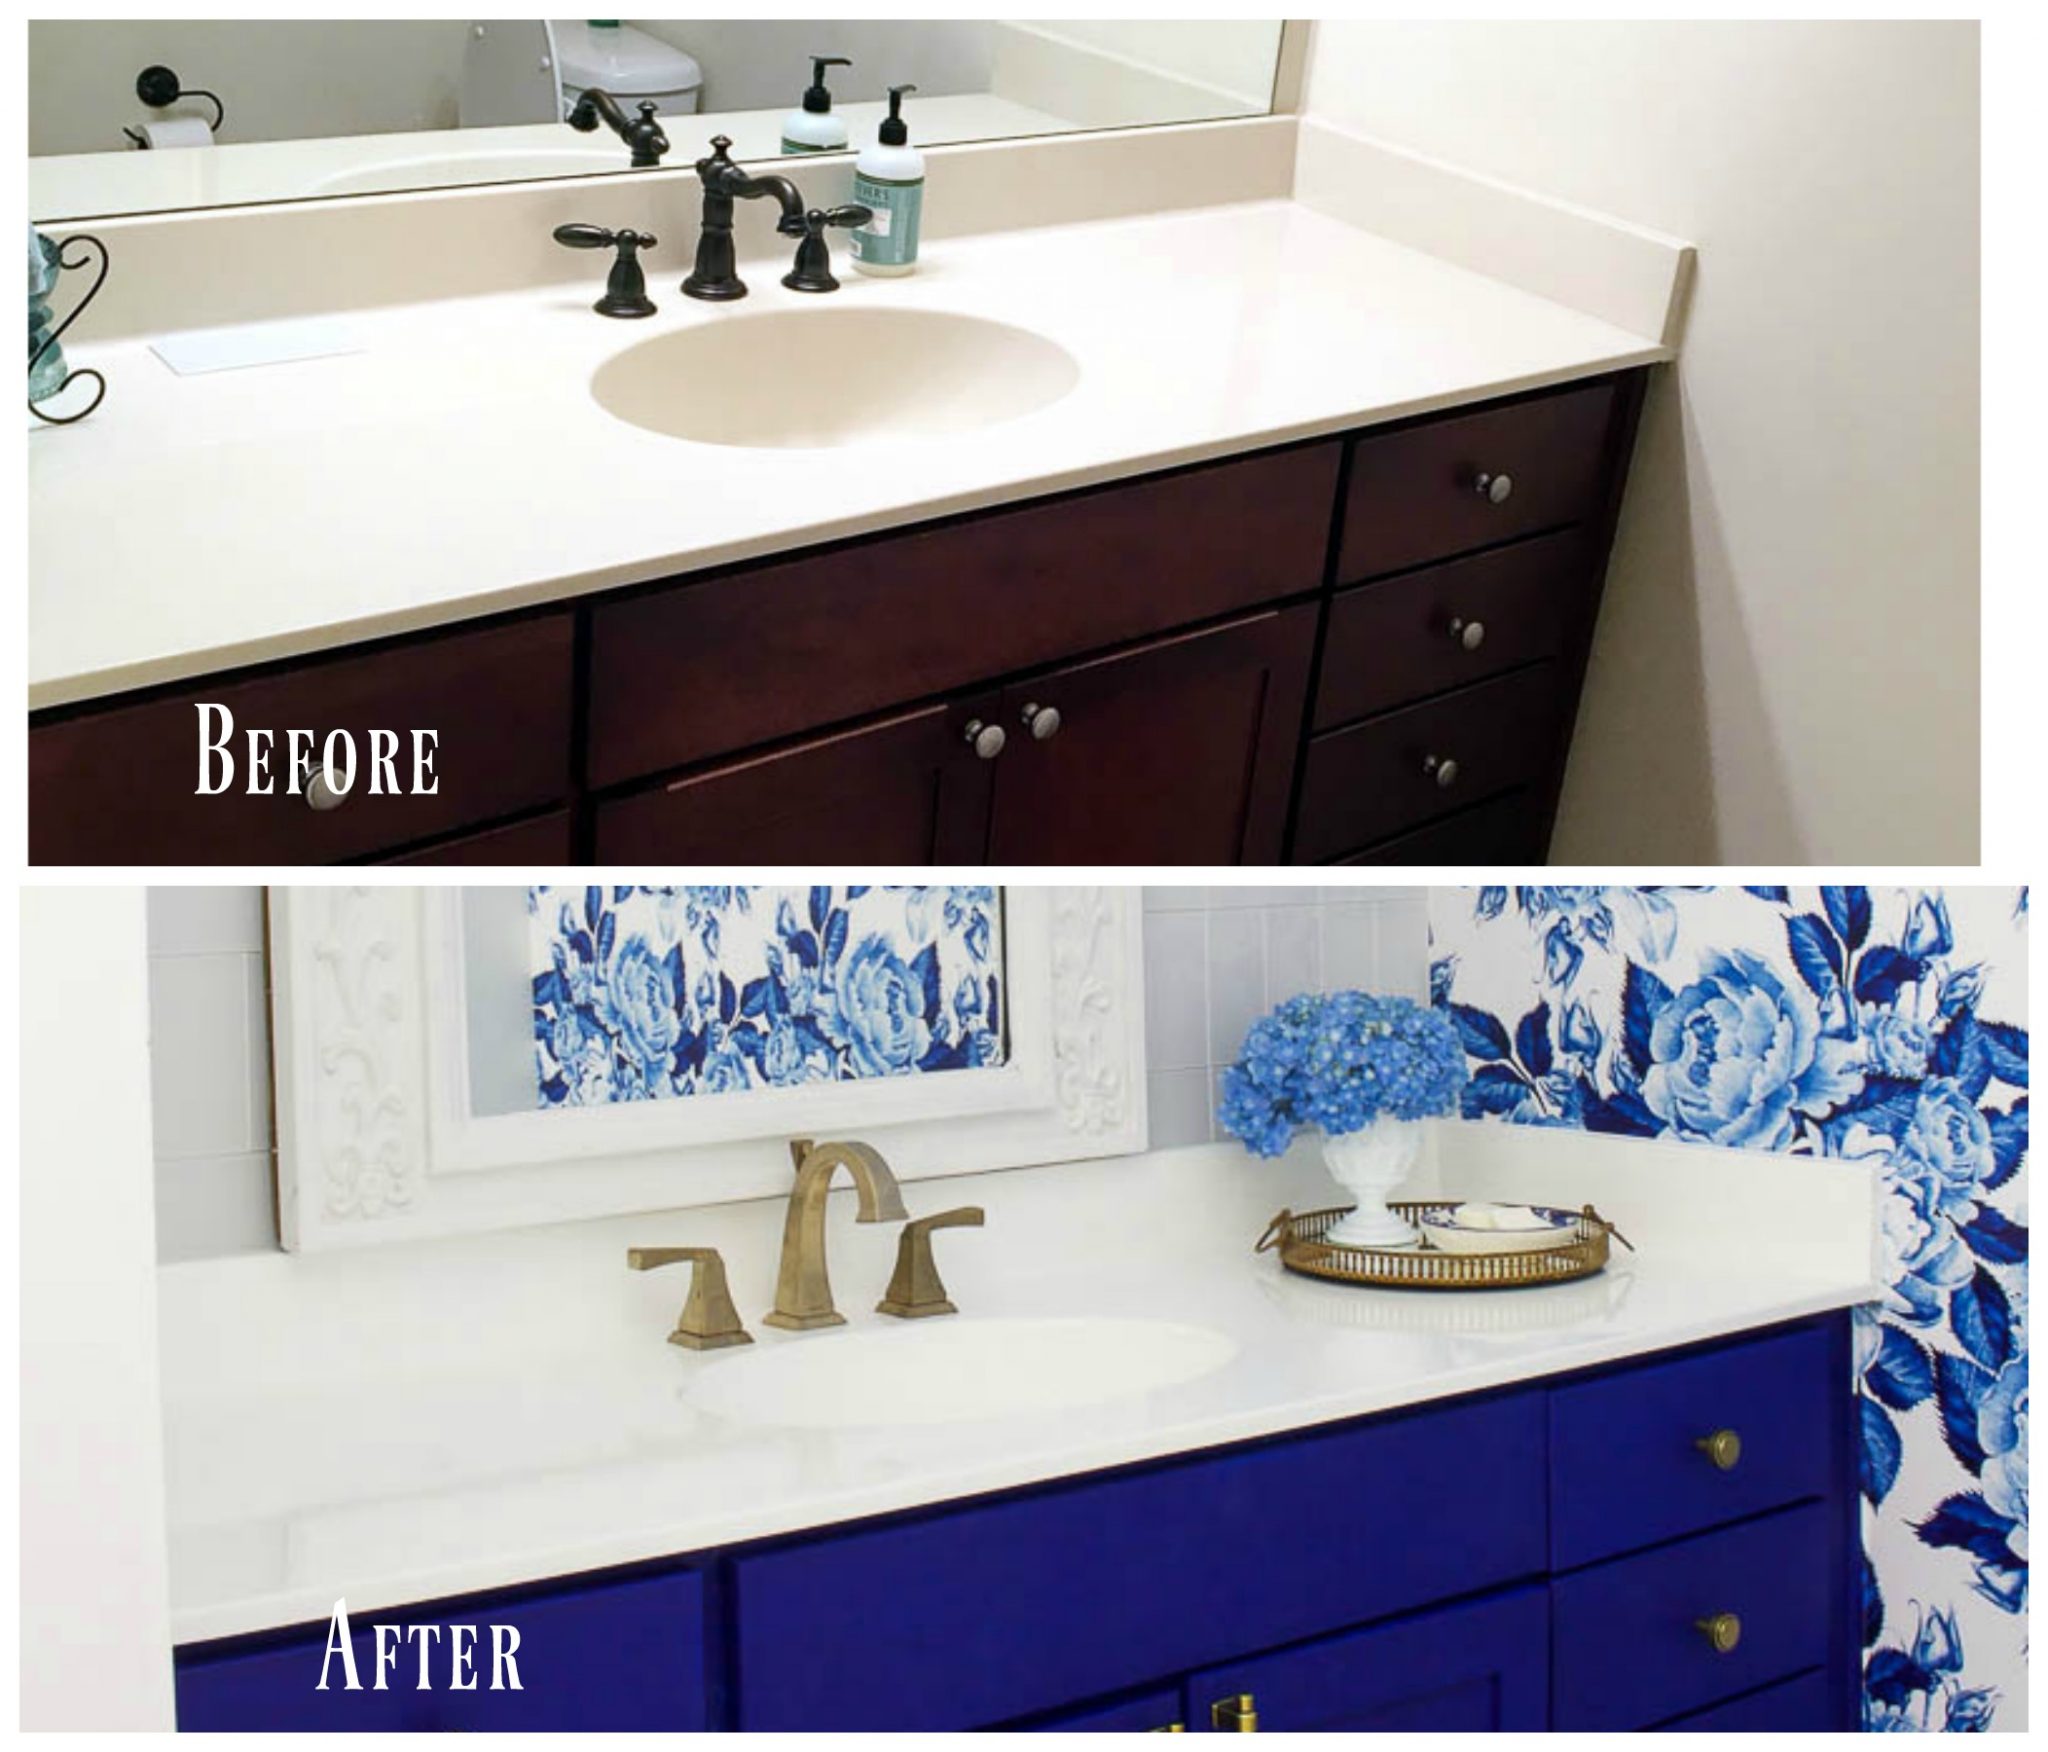 Diy Painted Bathroom Countertop And Sink 2 Bees In A Pod,How To Use Washi Tape In Notes